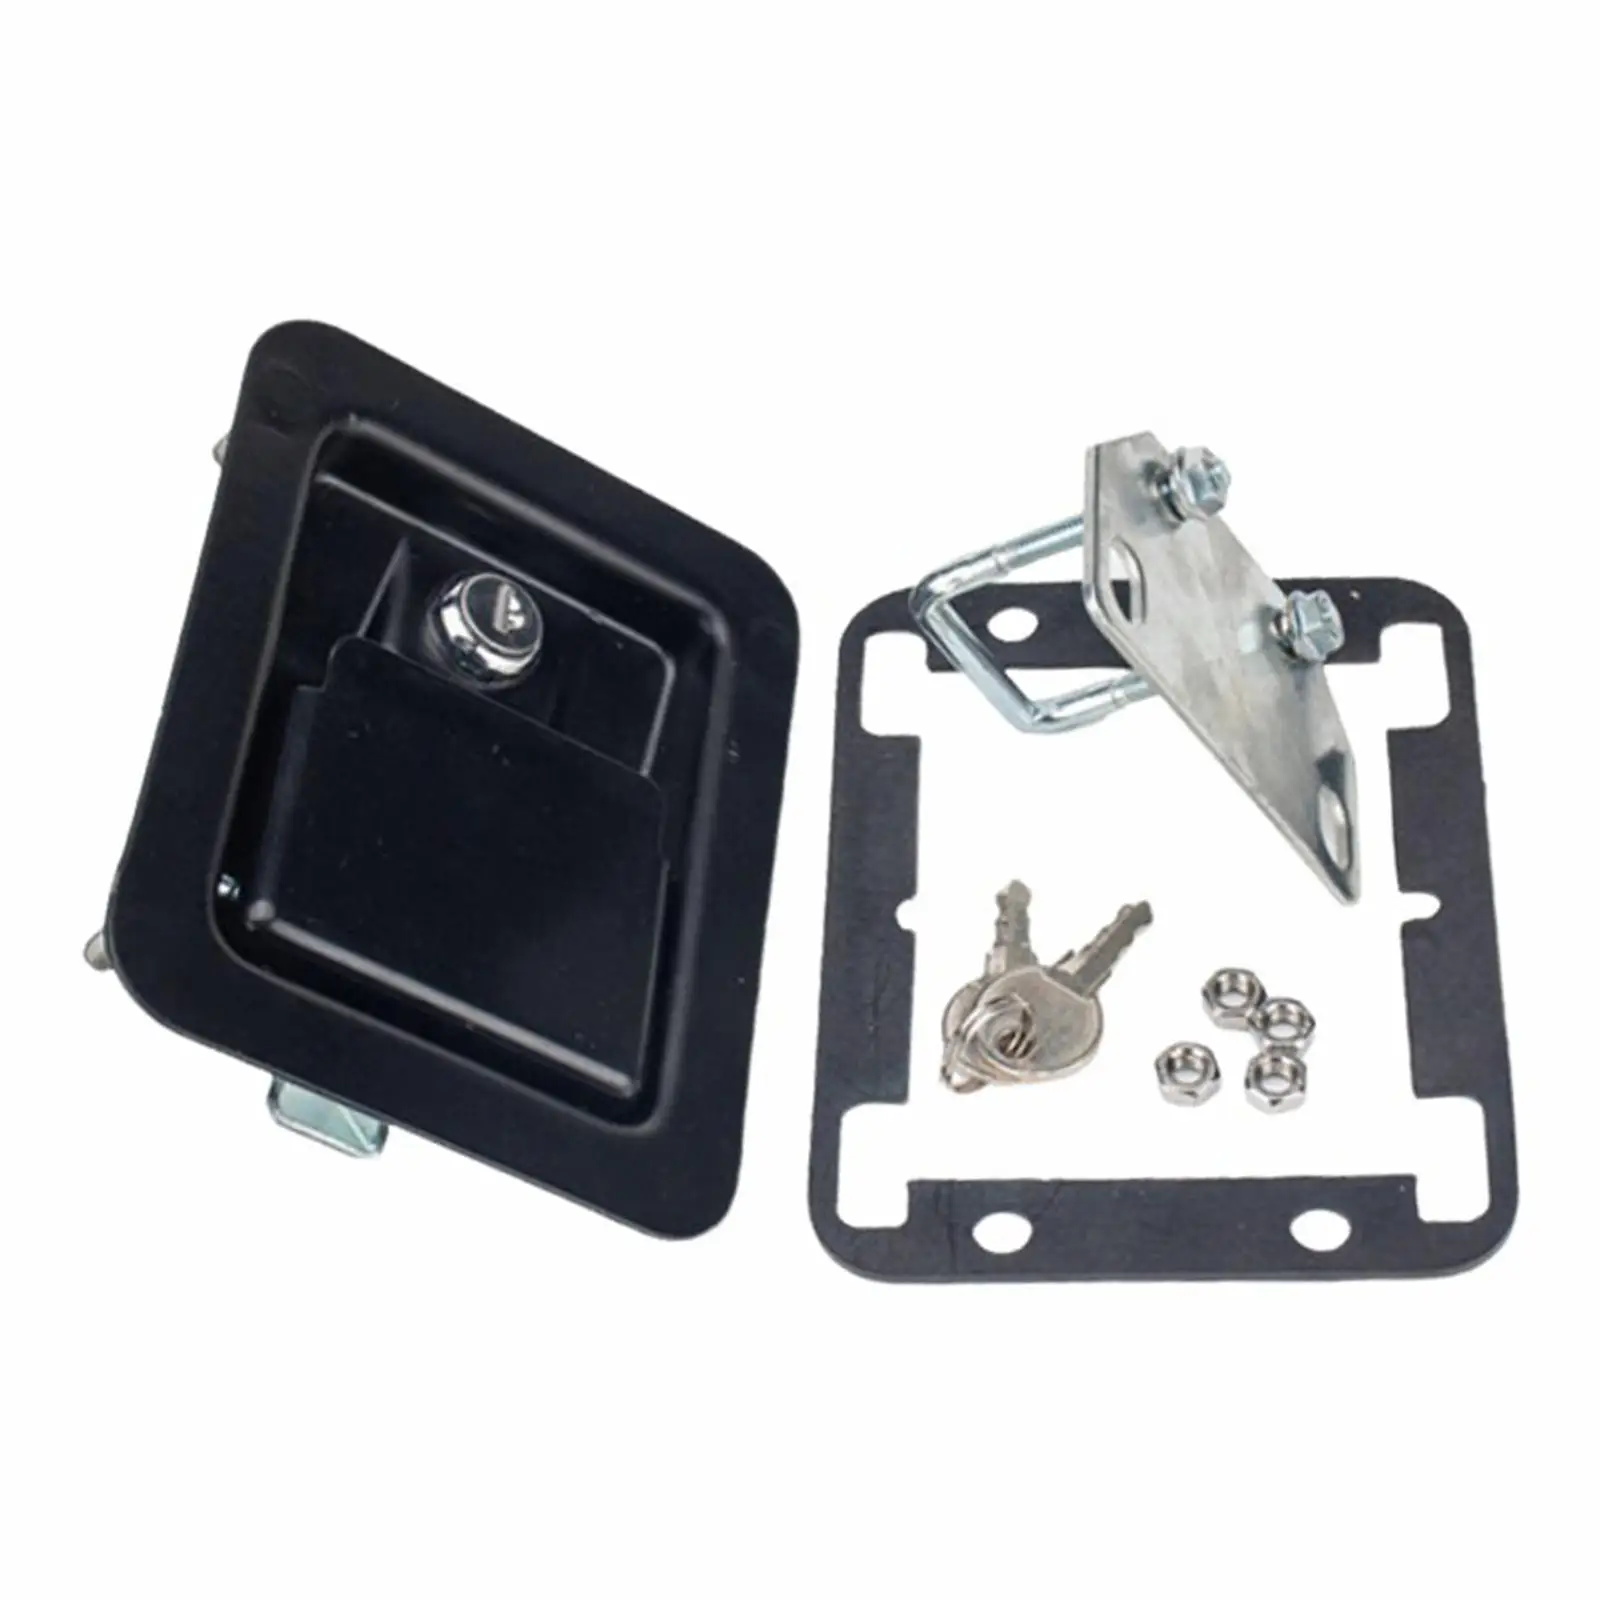 Truck Toolbox Lock with Gasket Trailer Paddle Door Latch Automotive Accessories for Camper RV Car Truck Stable Performance